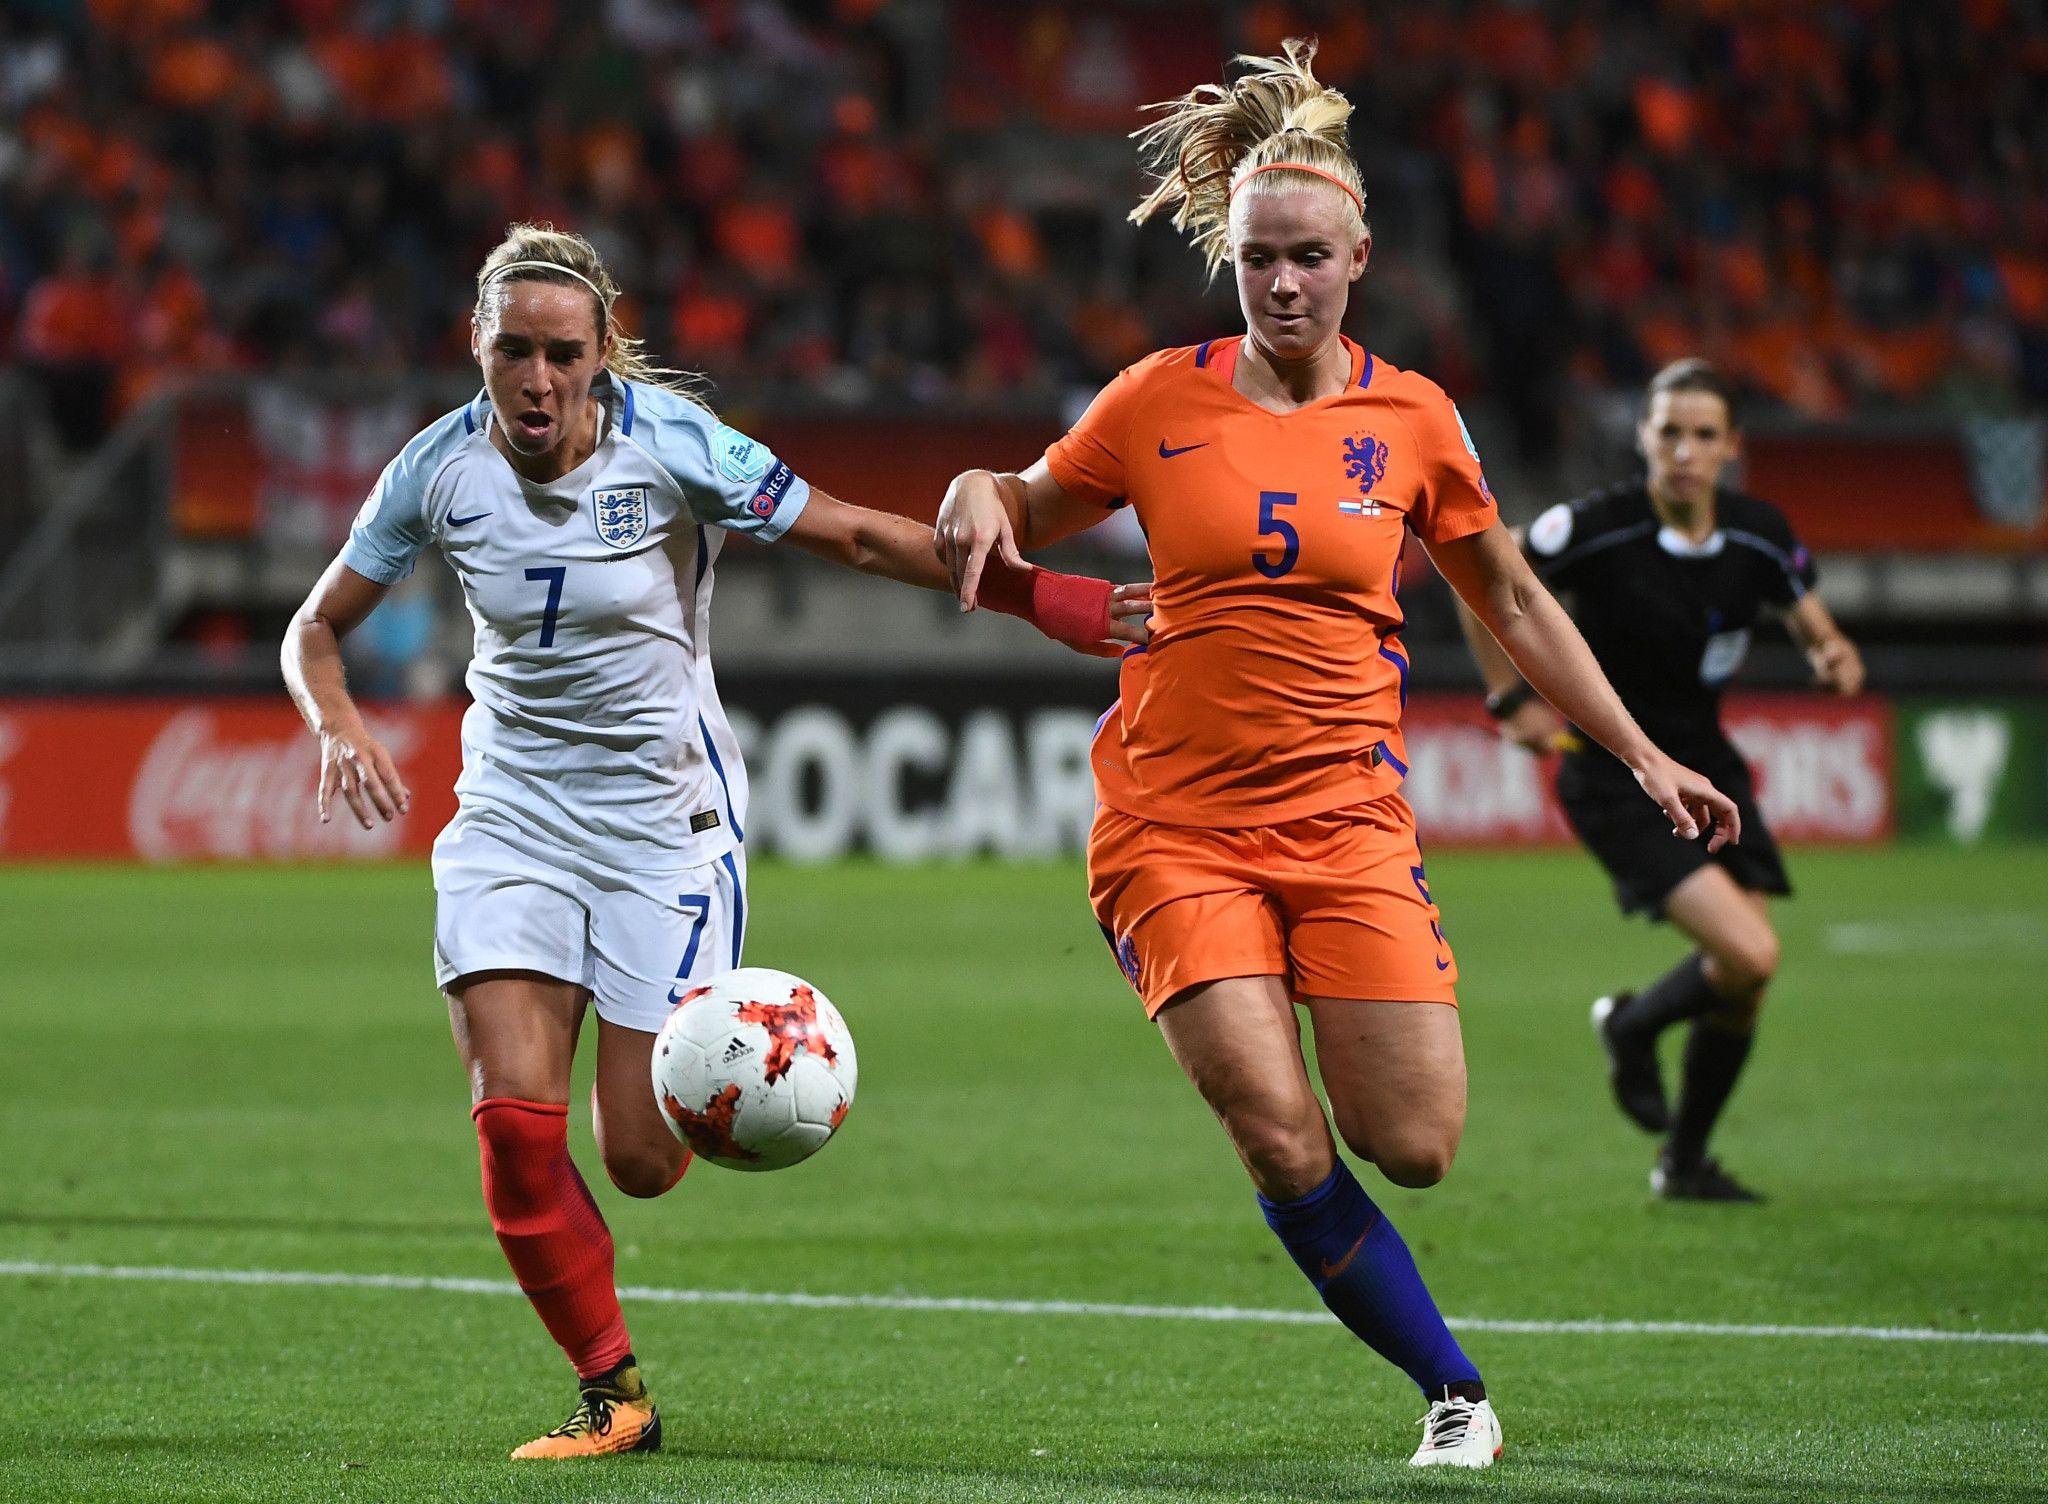 The incidents involving Mark Sampson are alleged to have taken place during a UEFA European Championship semi-final between England and The Netherlands last year ©Getty Images